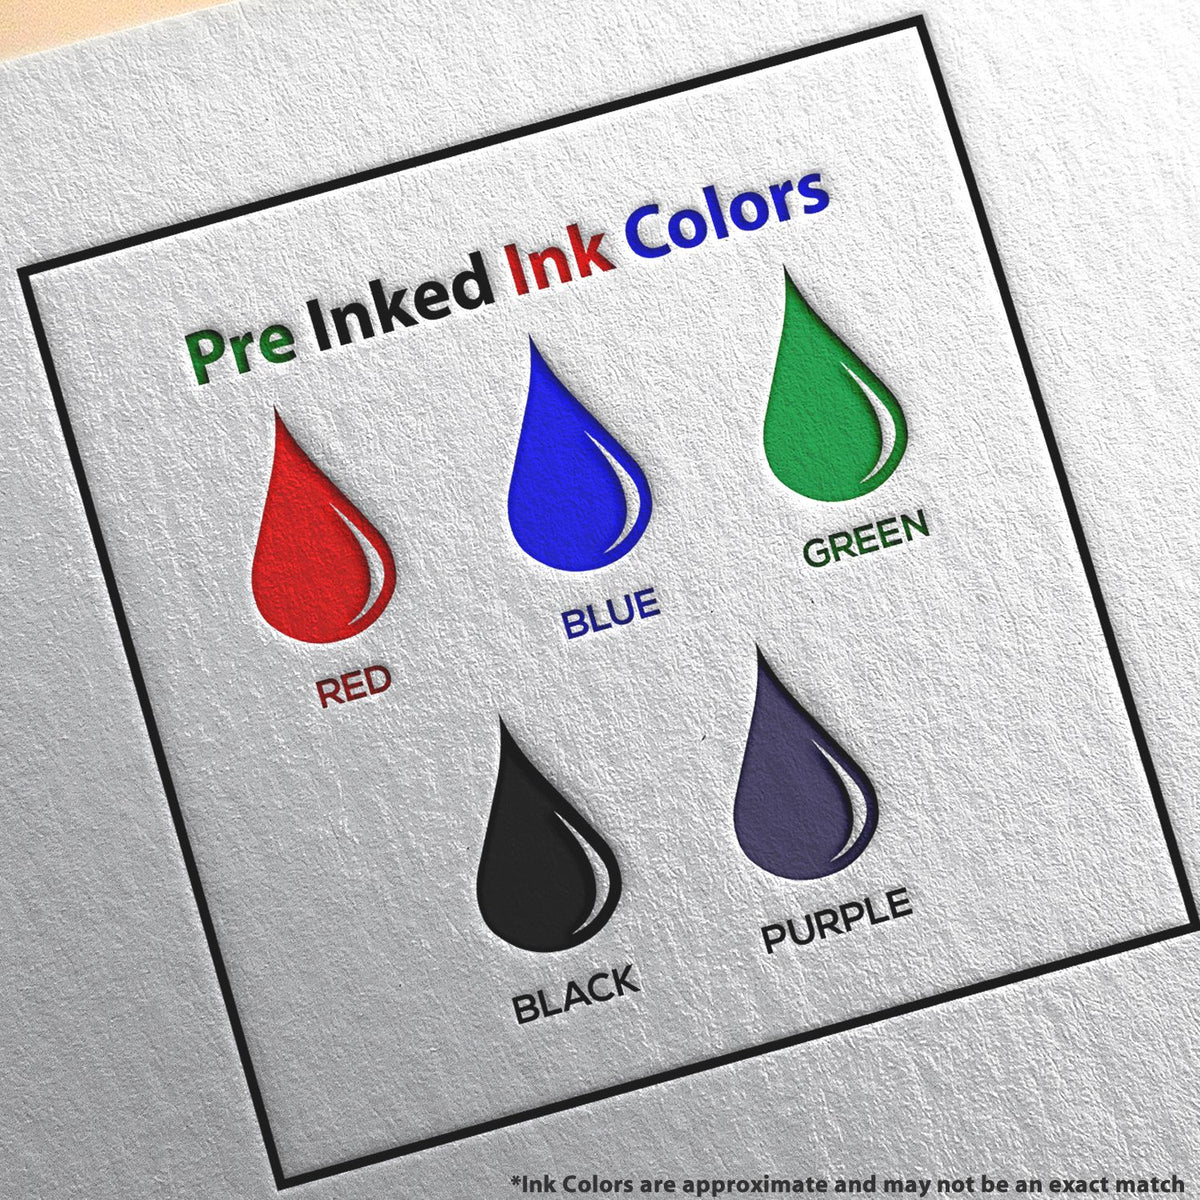 A picture showing the different ink colors or hues available for the PSI South Dakota Notary Stamp product.